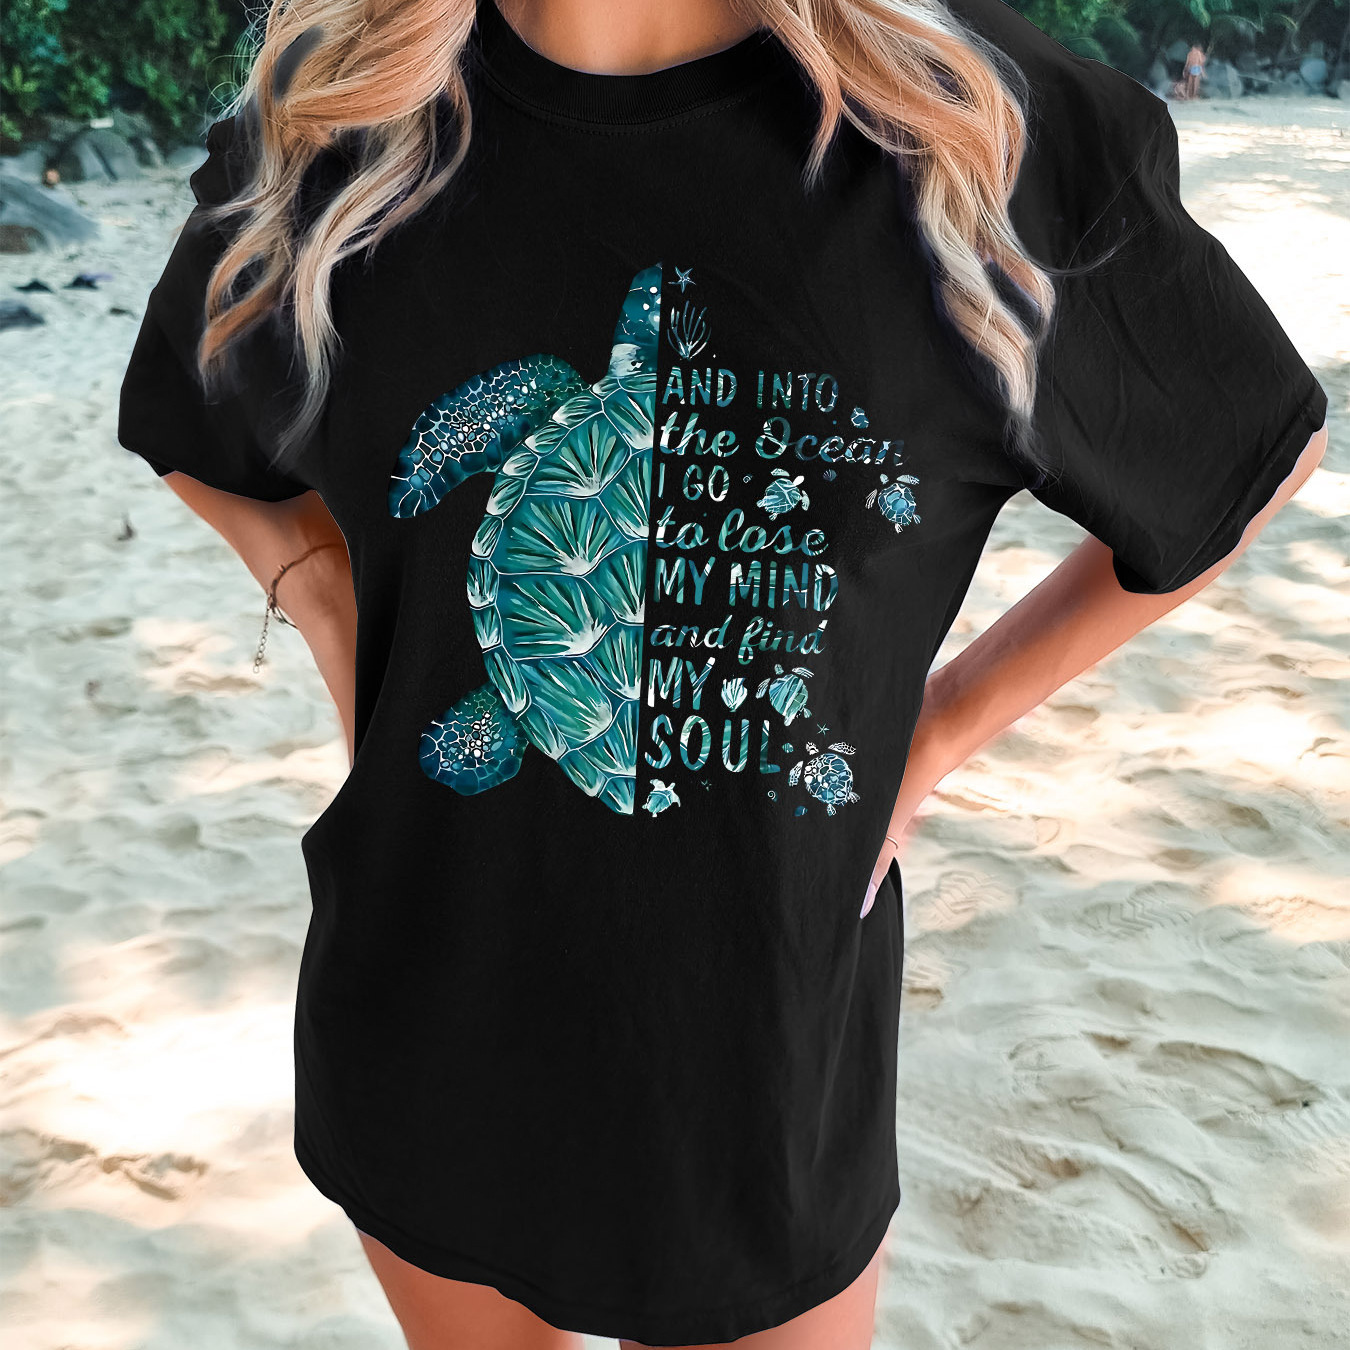 

Letter & Turtle Print T-shirt, Short Sleeve Crew Neck Casual Top For Summer & Spring, Women's Clothing